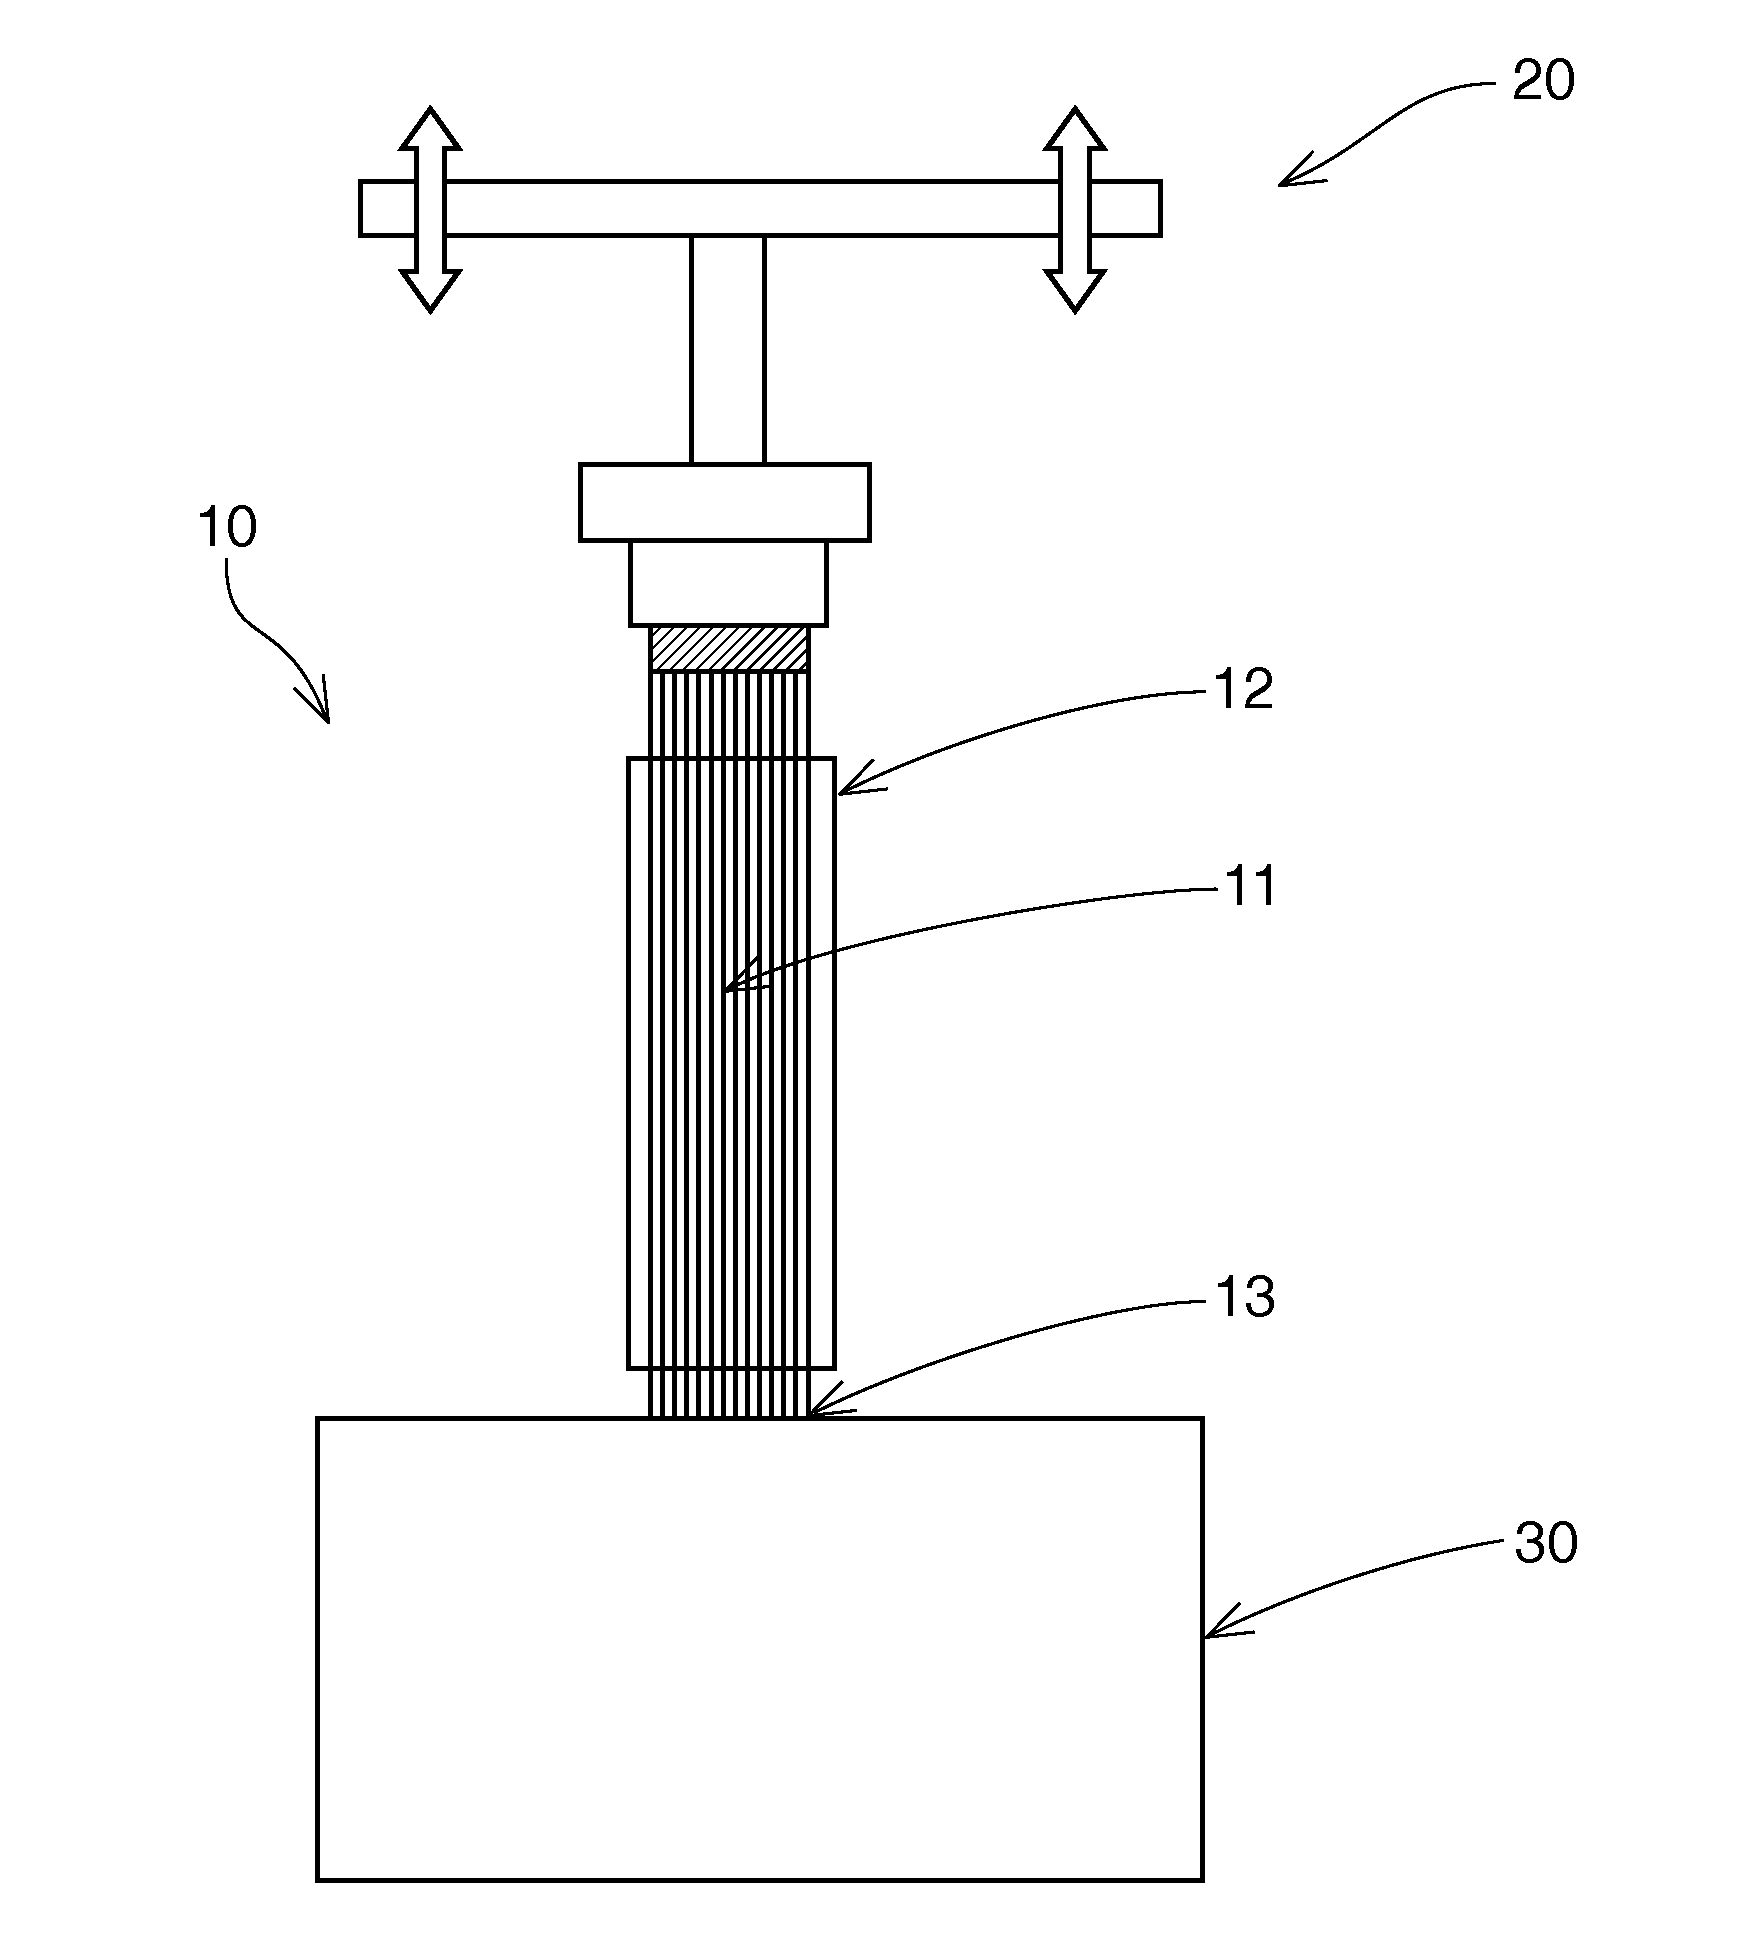 Method for assessment of force properties generated by the fiber tip